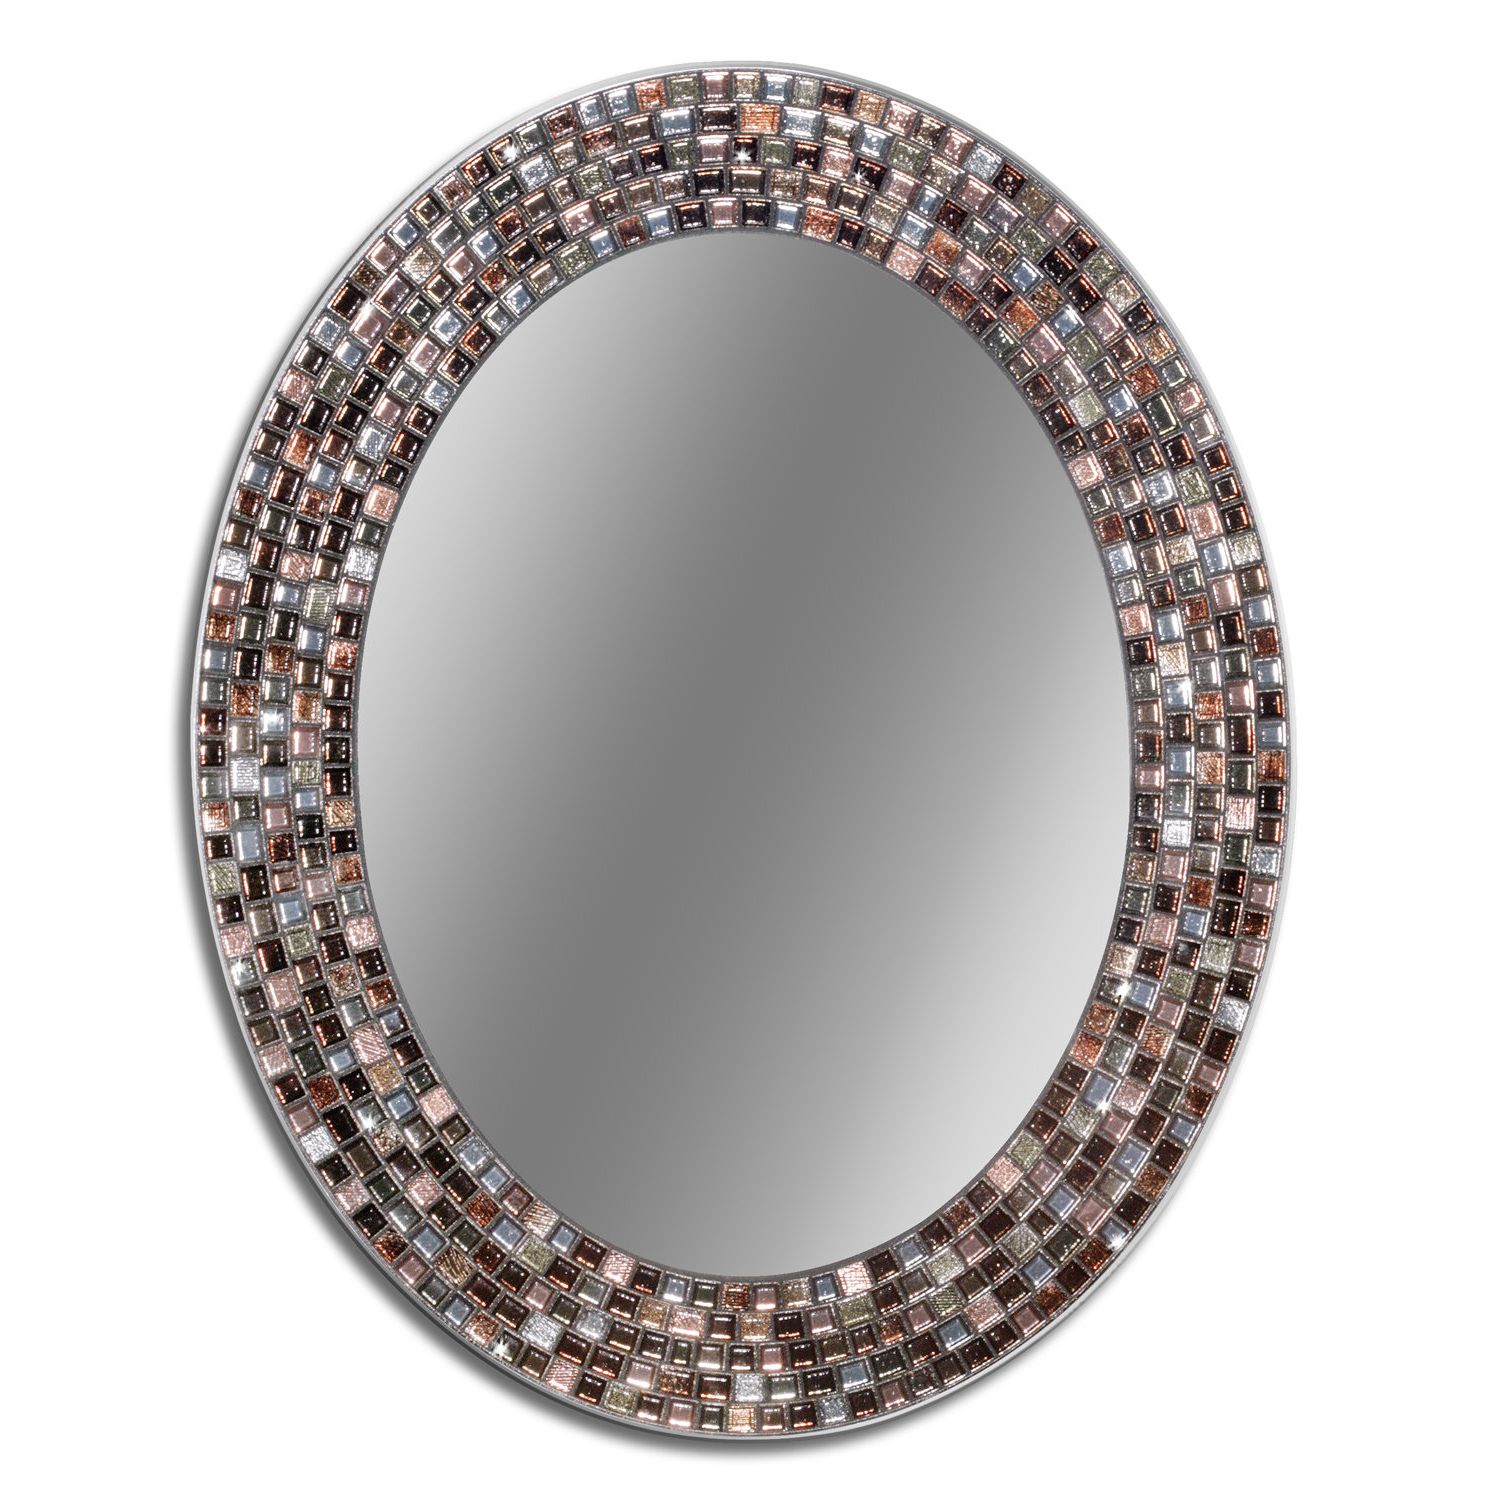 Hussain Tile Accent Wall Mirrors Pertaining To Most Up To Date Selden Frameless Oval Mosaic Wall Mirror (View 16 of 20)